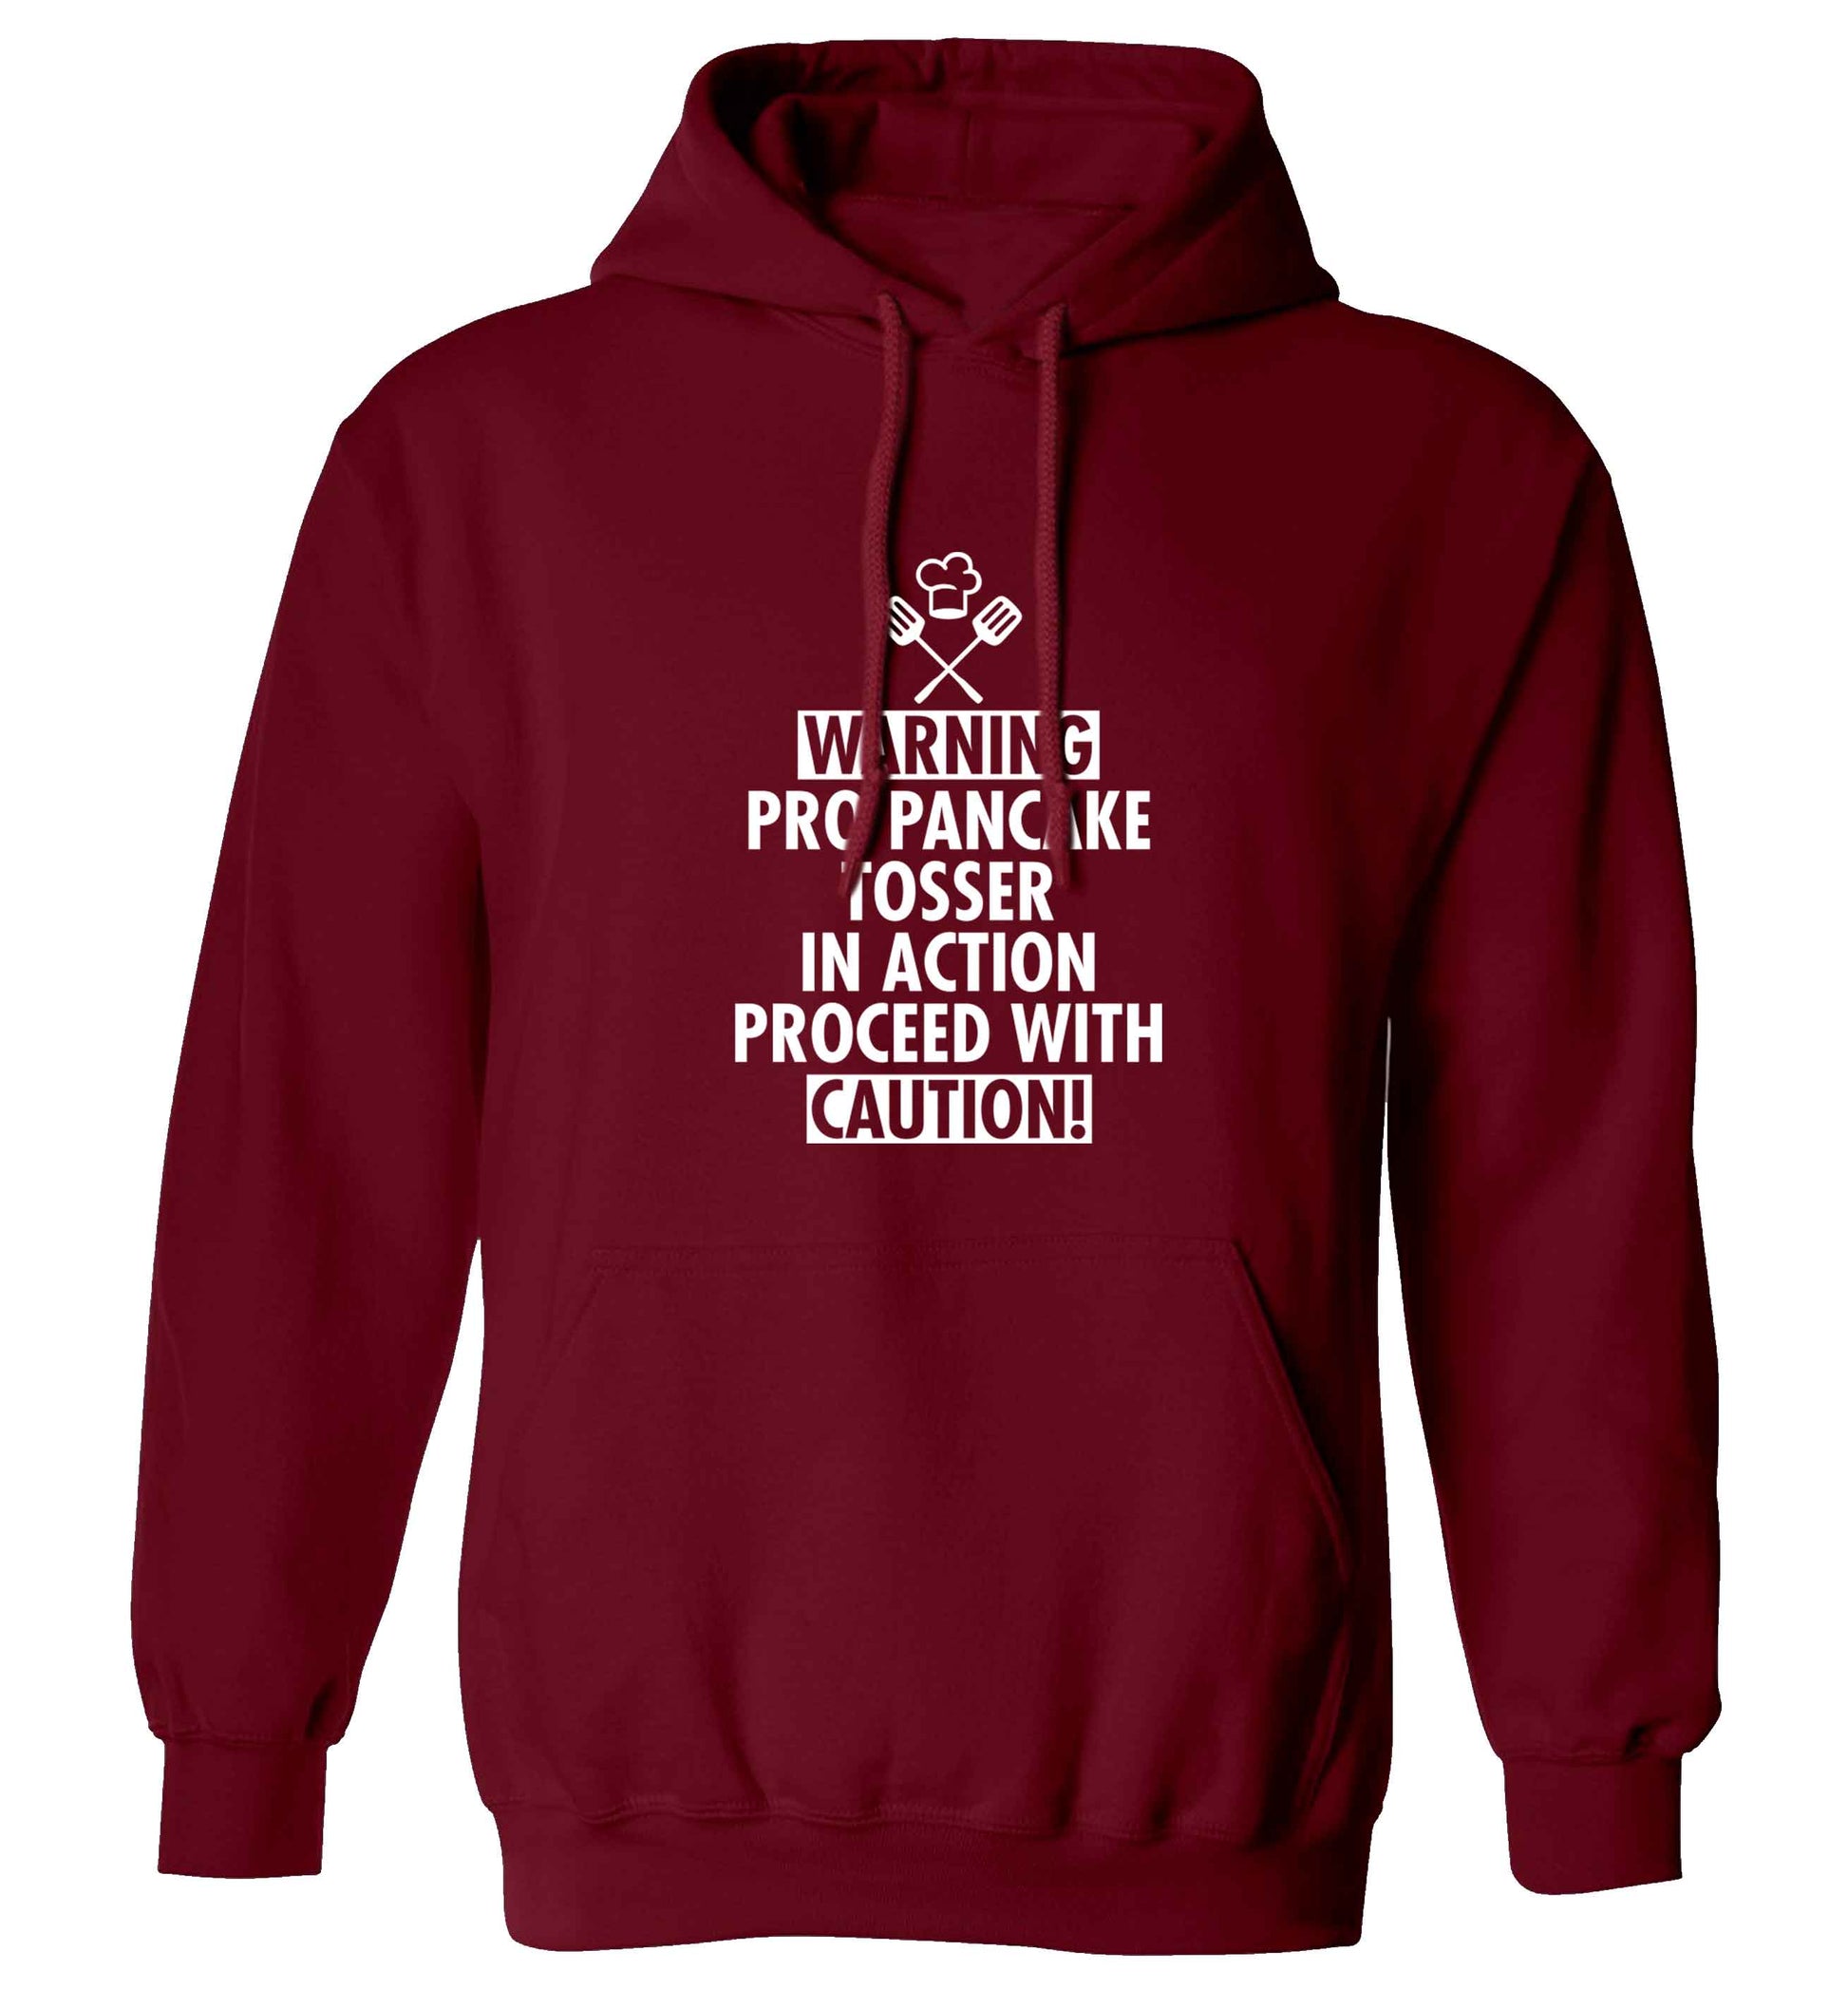 Warning pro pancake tosser in action proceed with caution adults unisex maroon hoodie 2XL